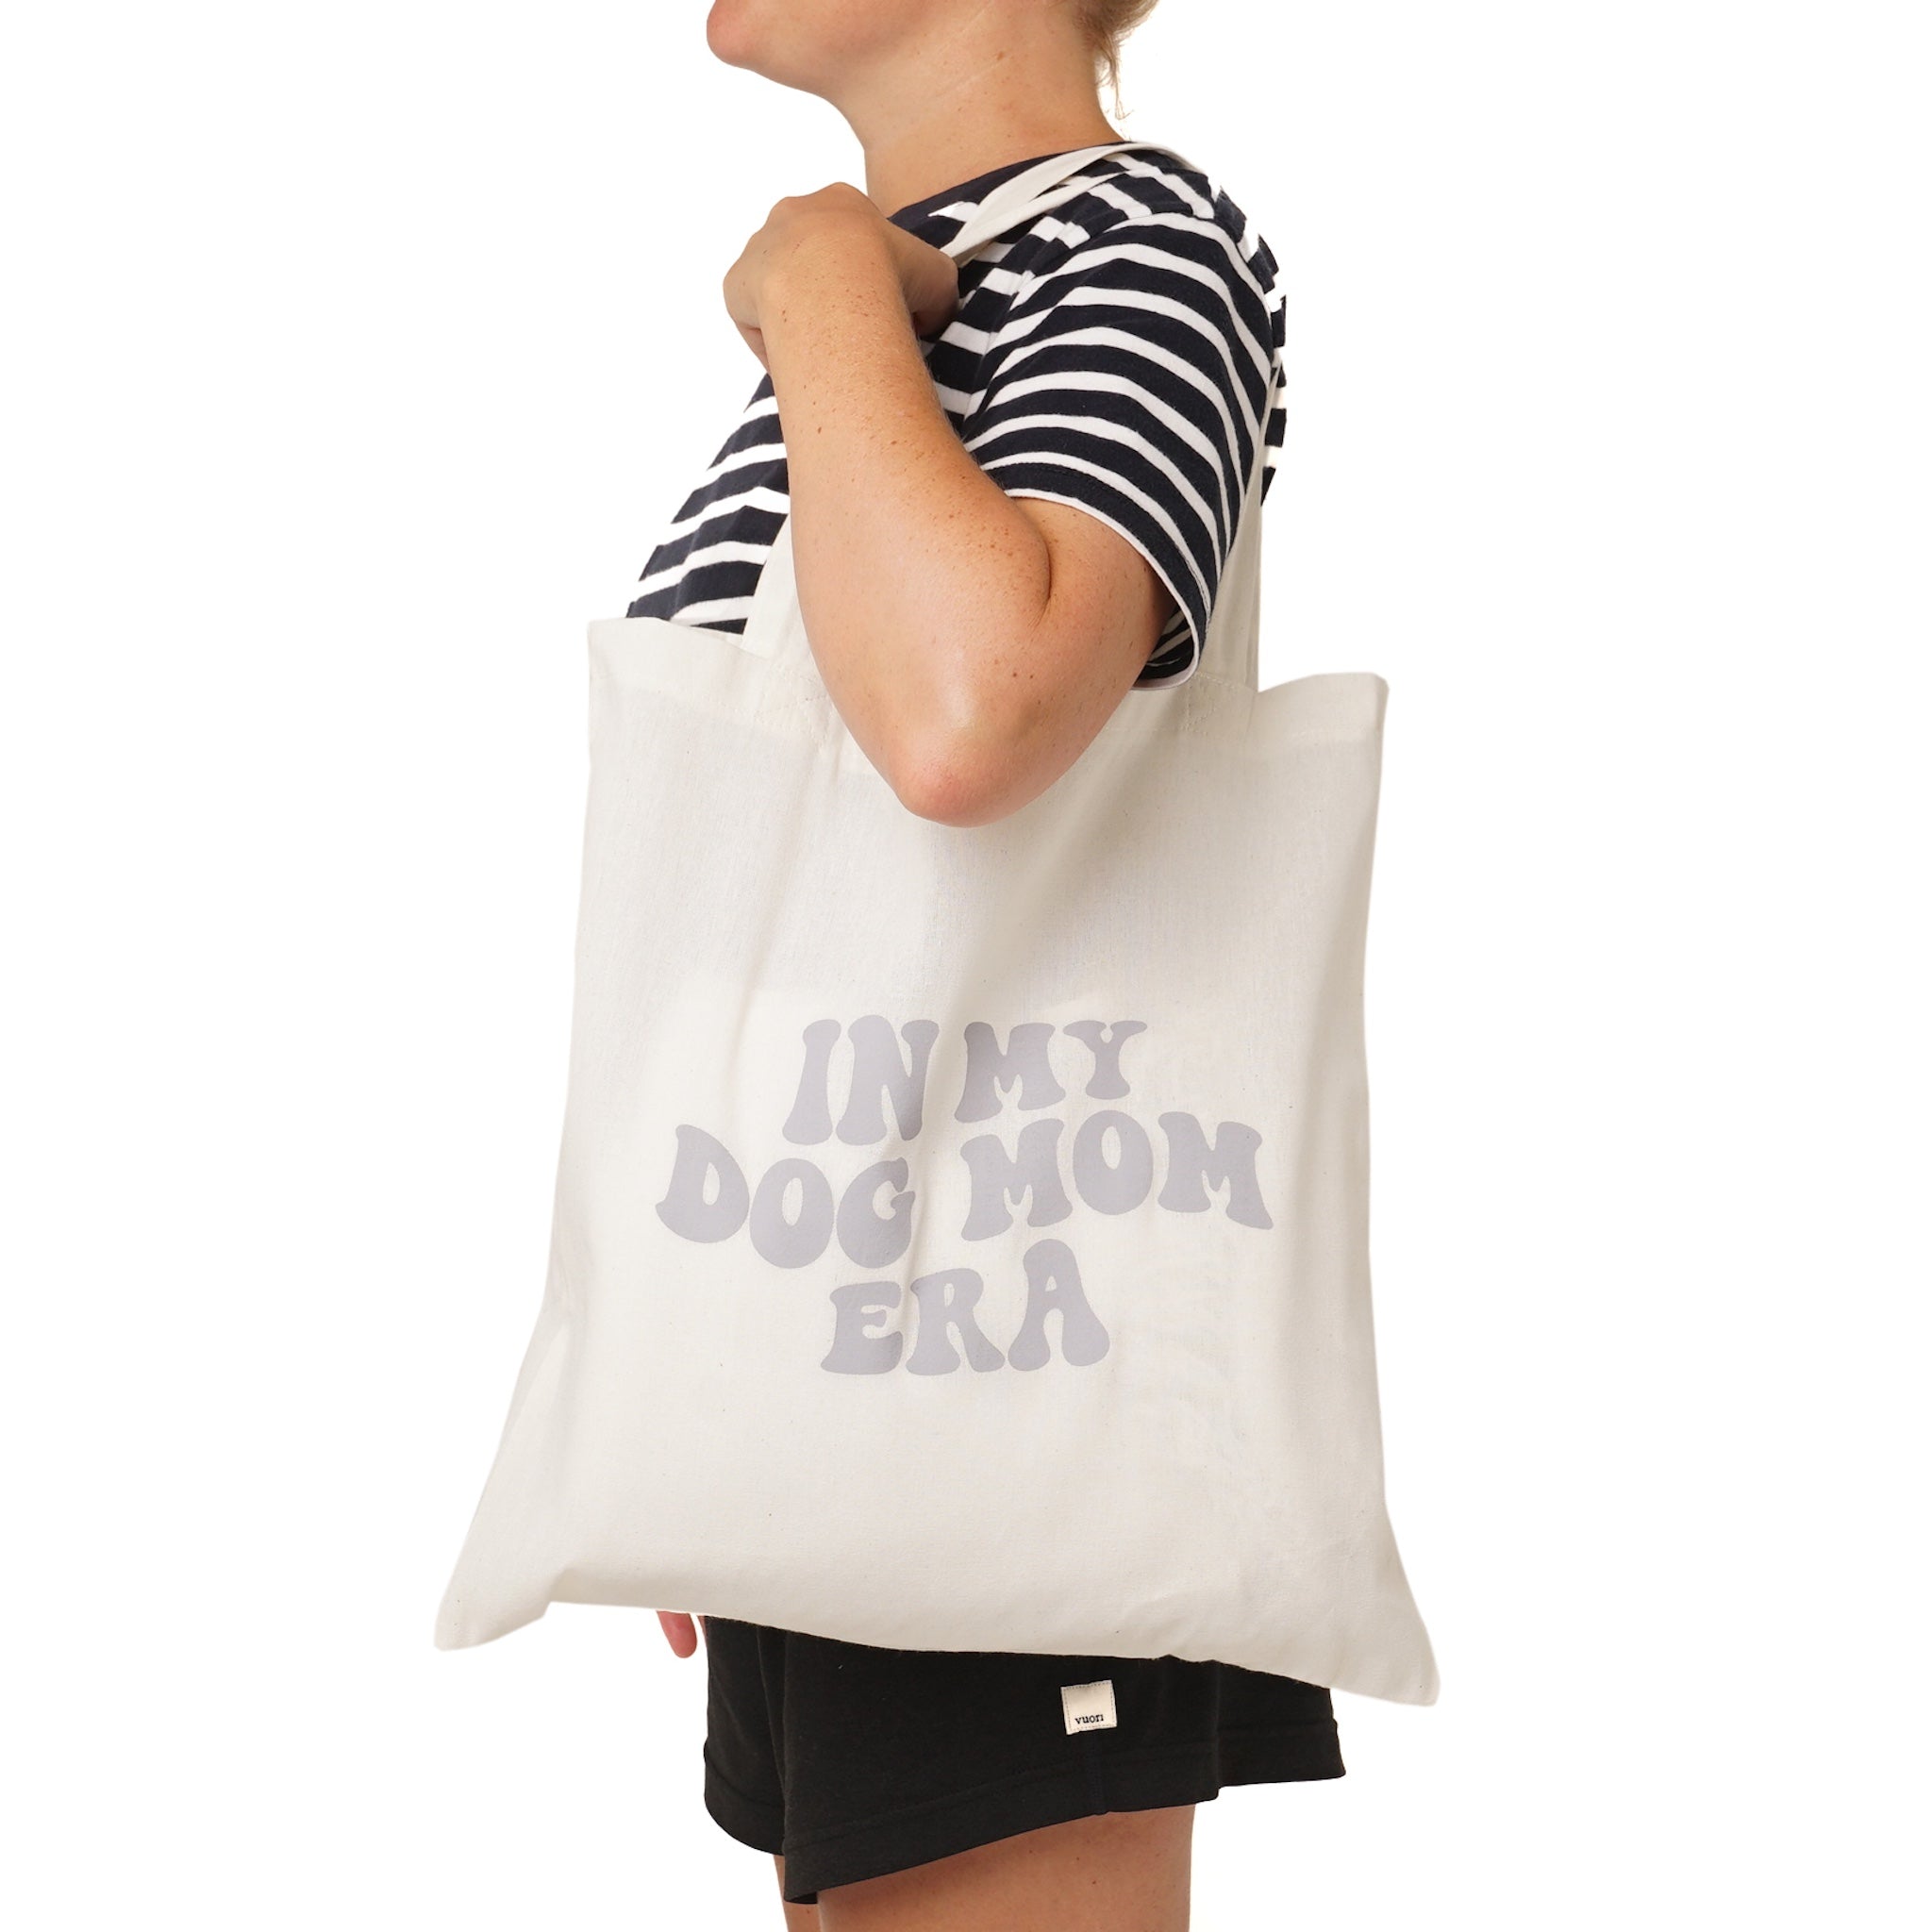 In My Dog Mom Era Tote - The Paws